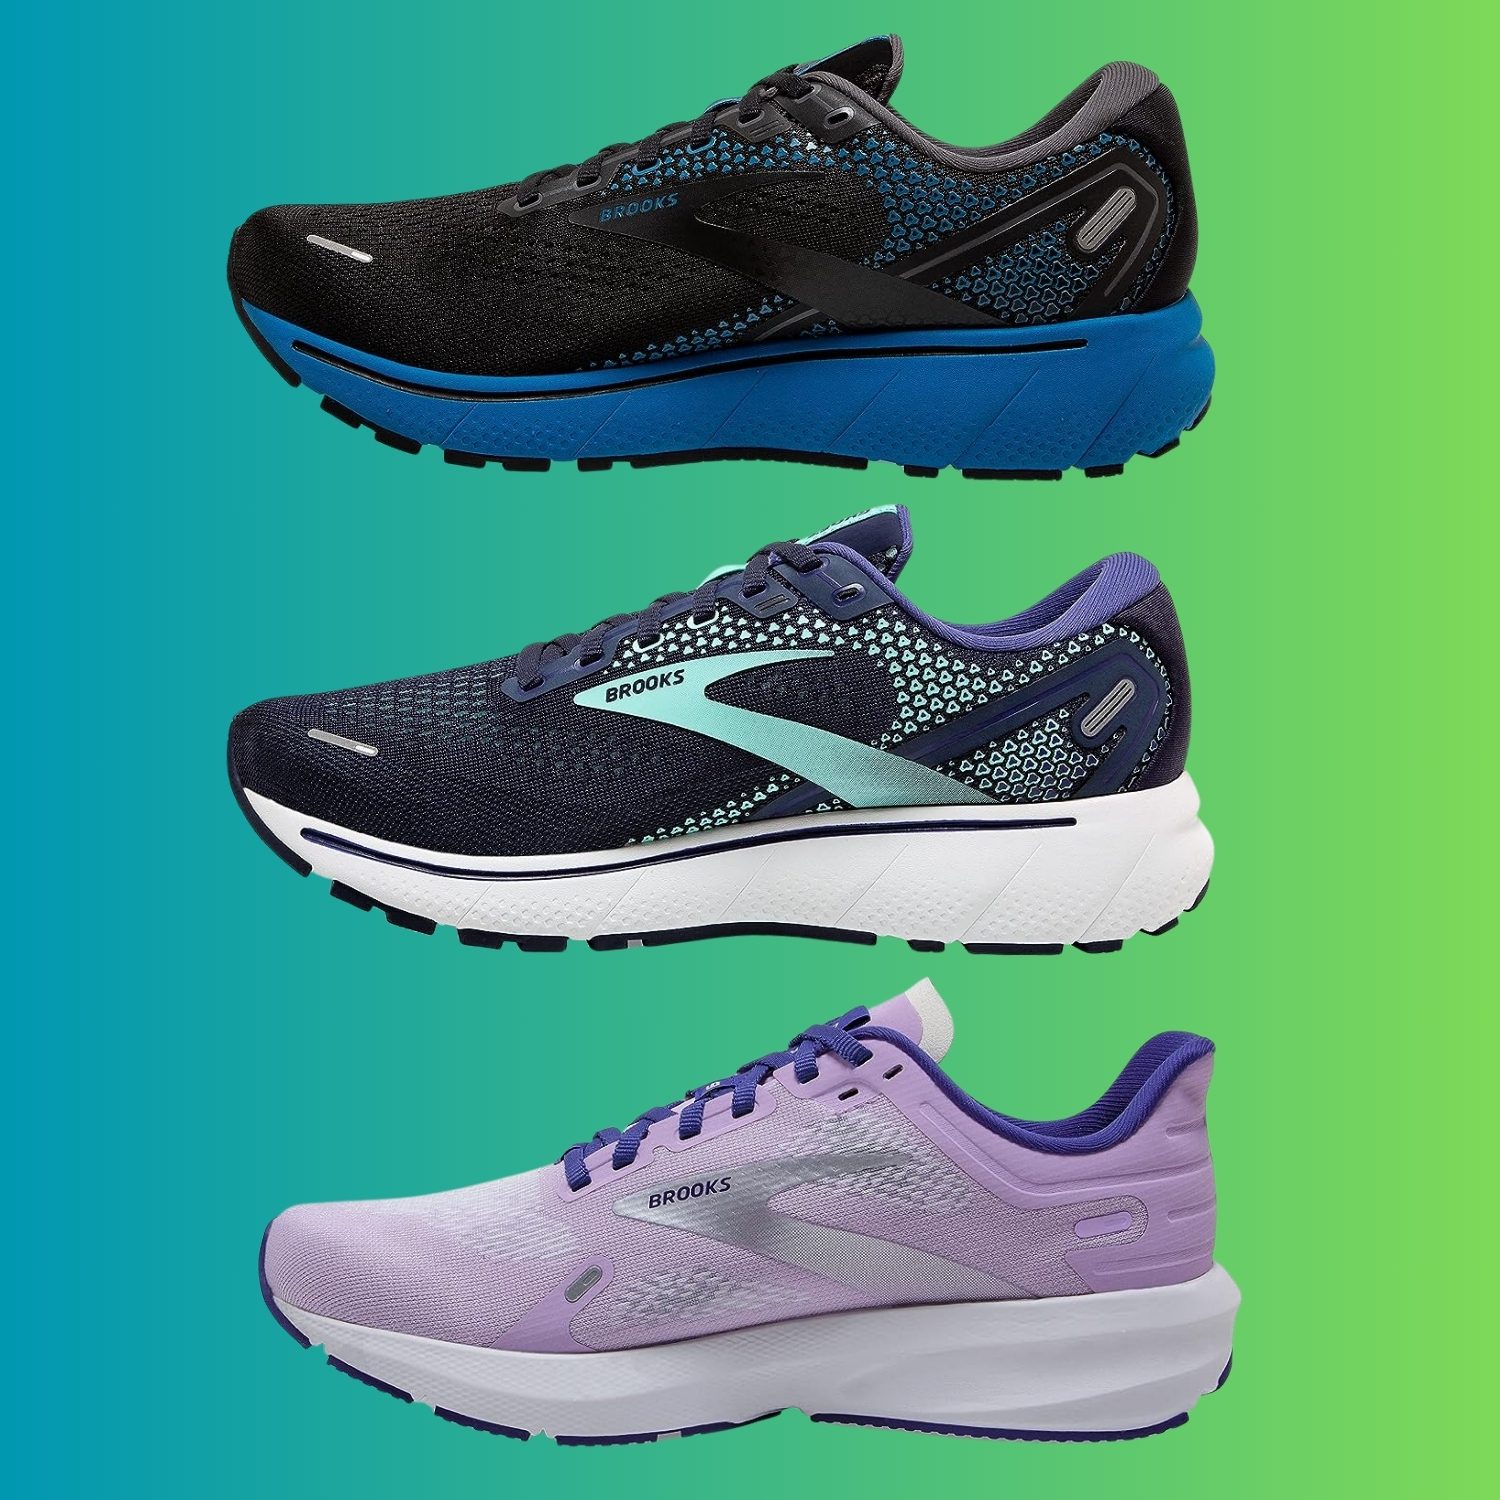 Best Brooks Shoes for Long-distance Running